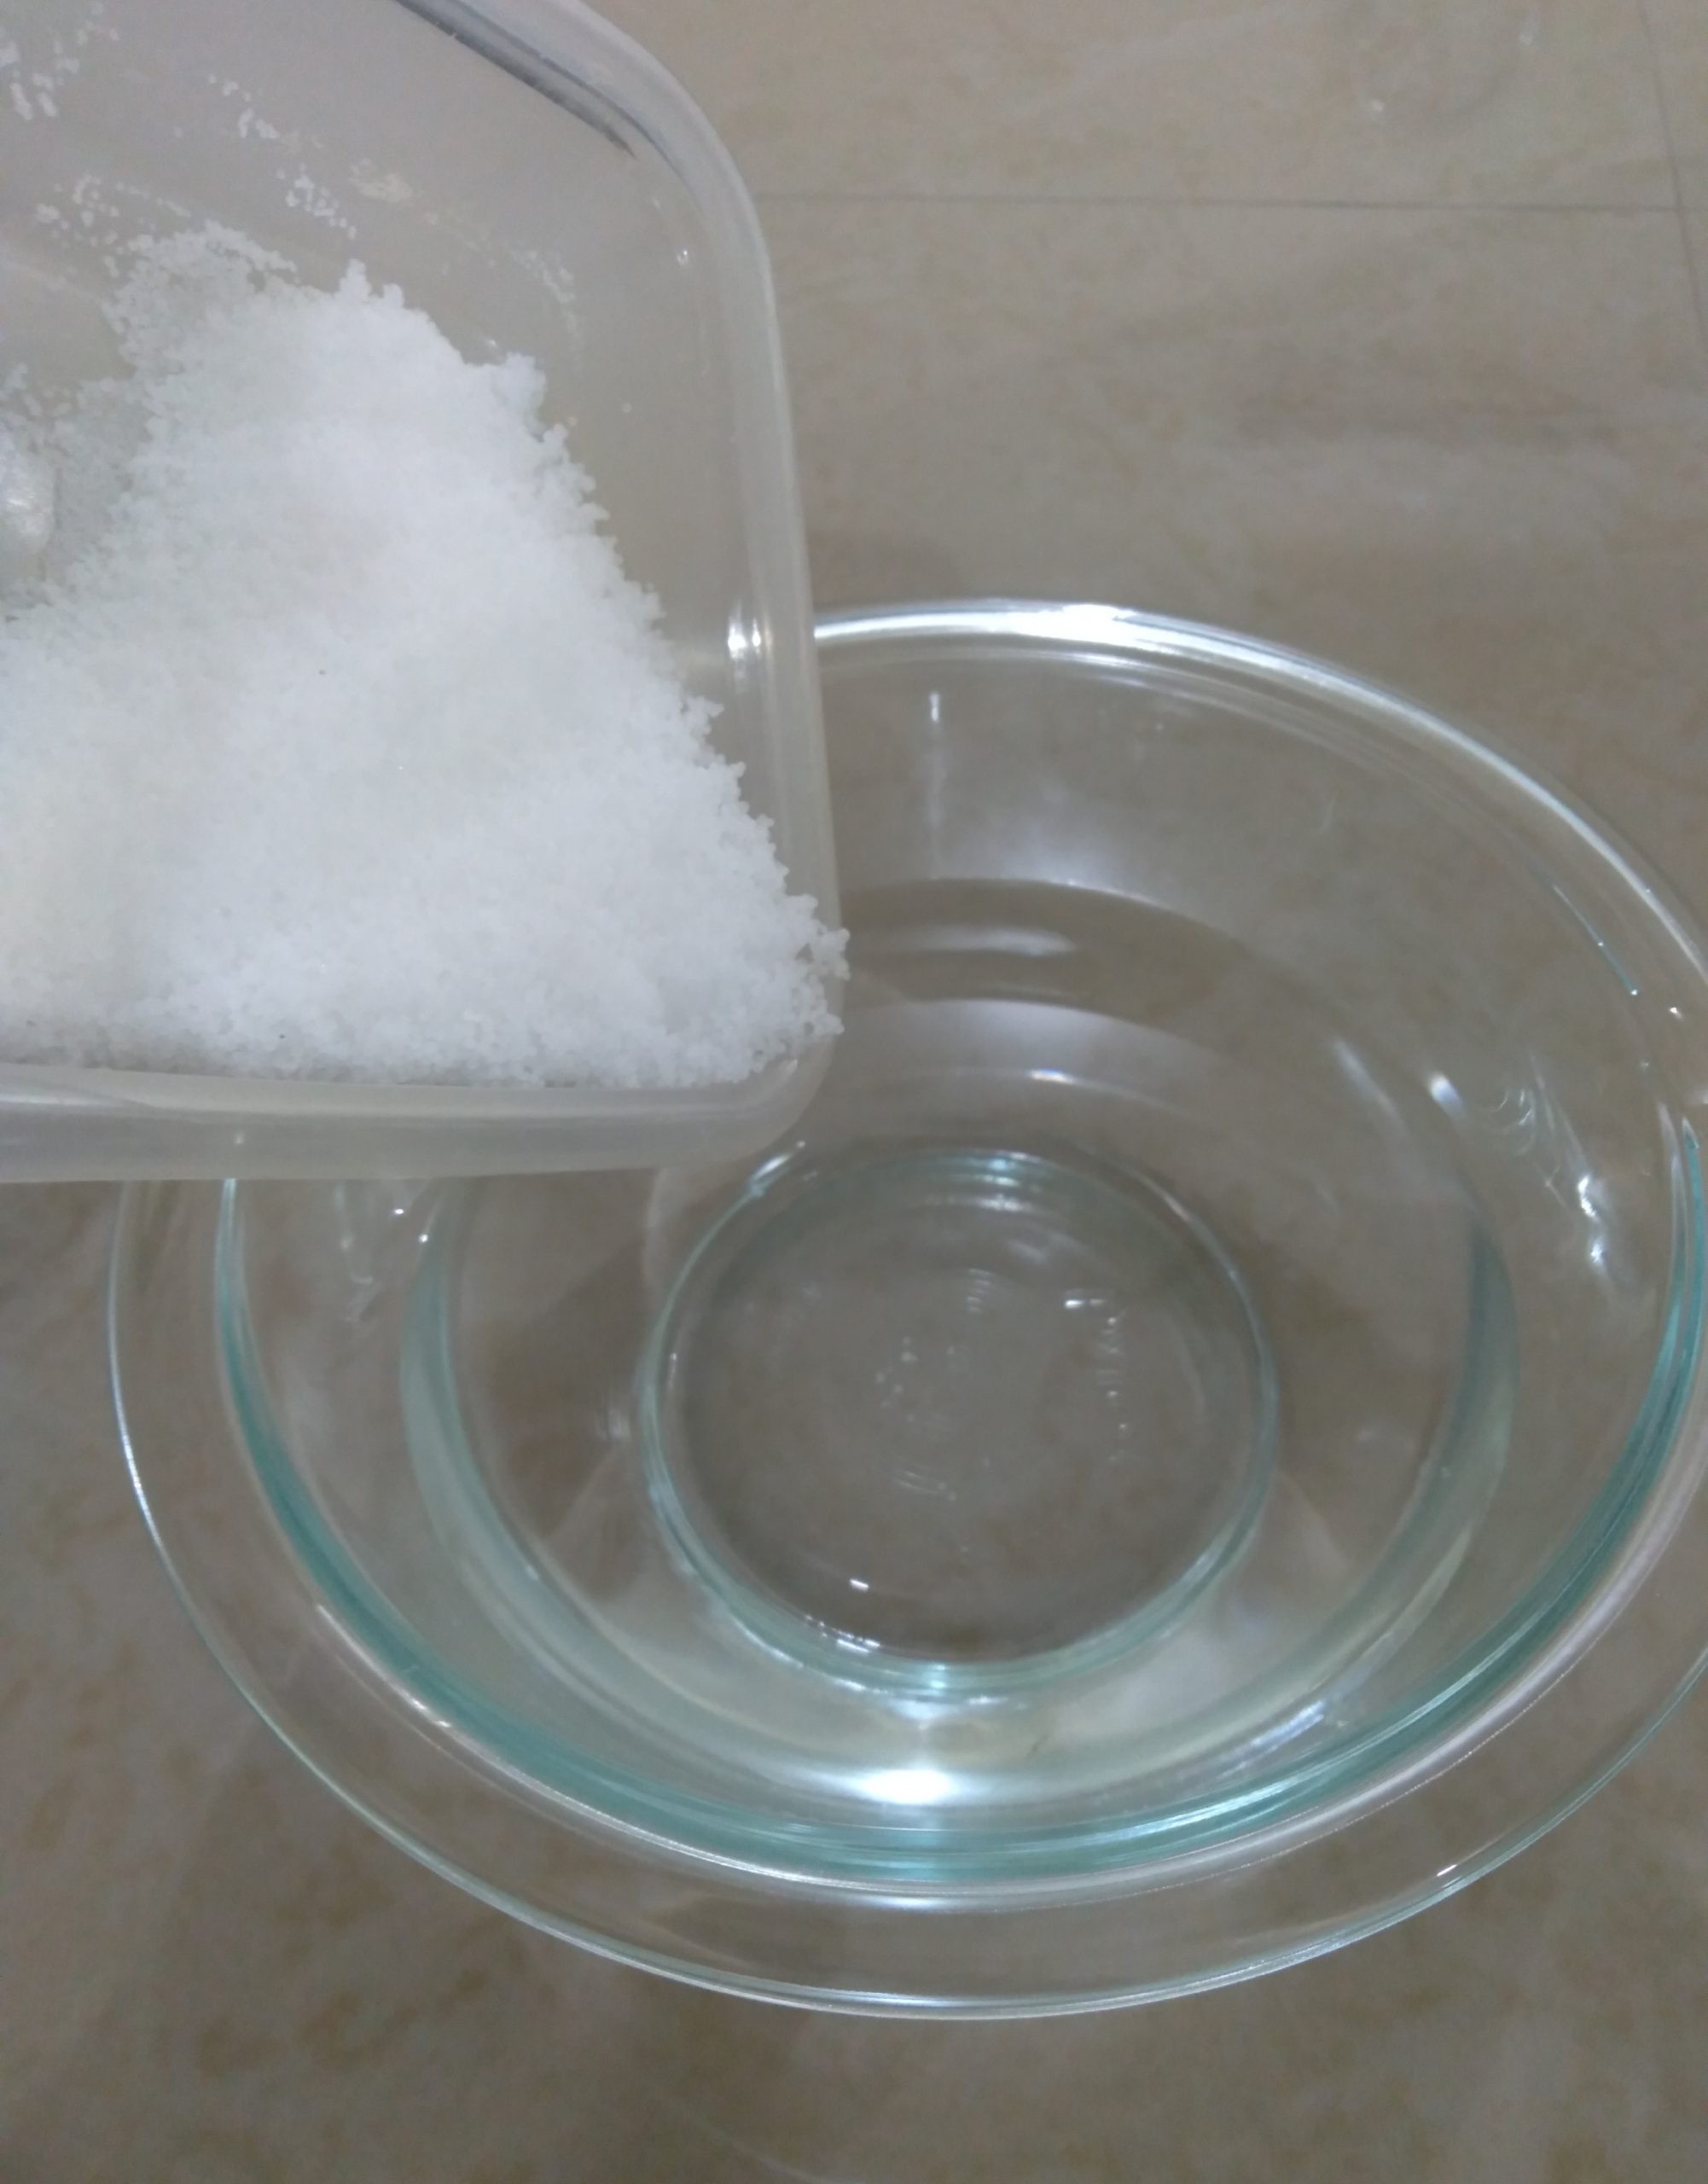 Mixing sodium hydroxide solution